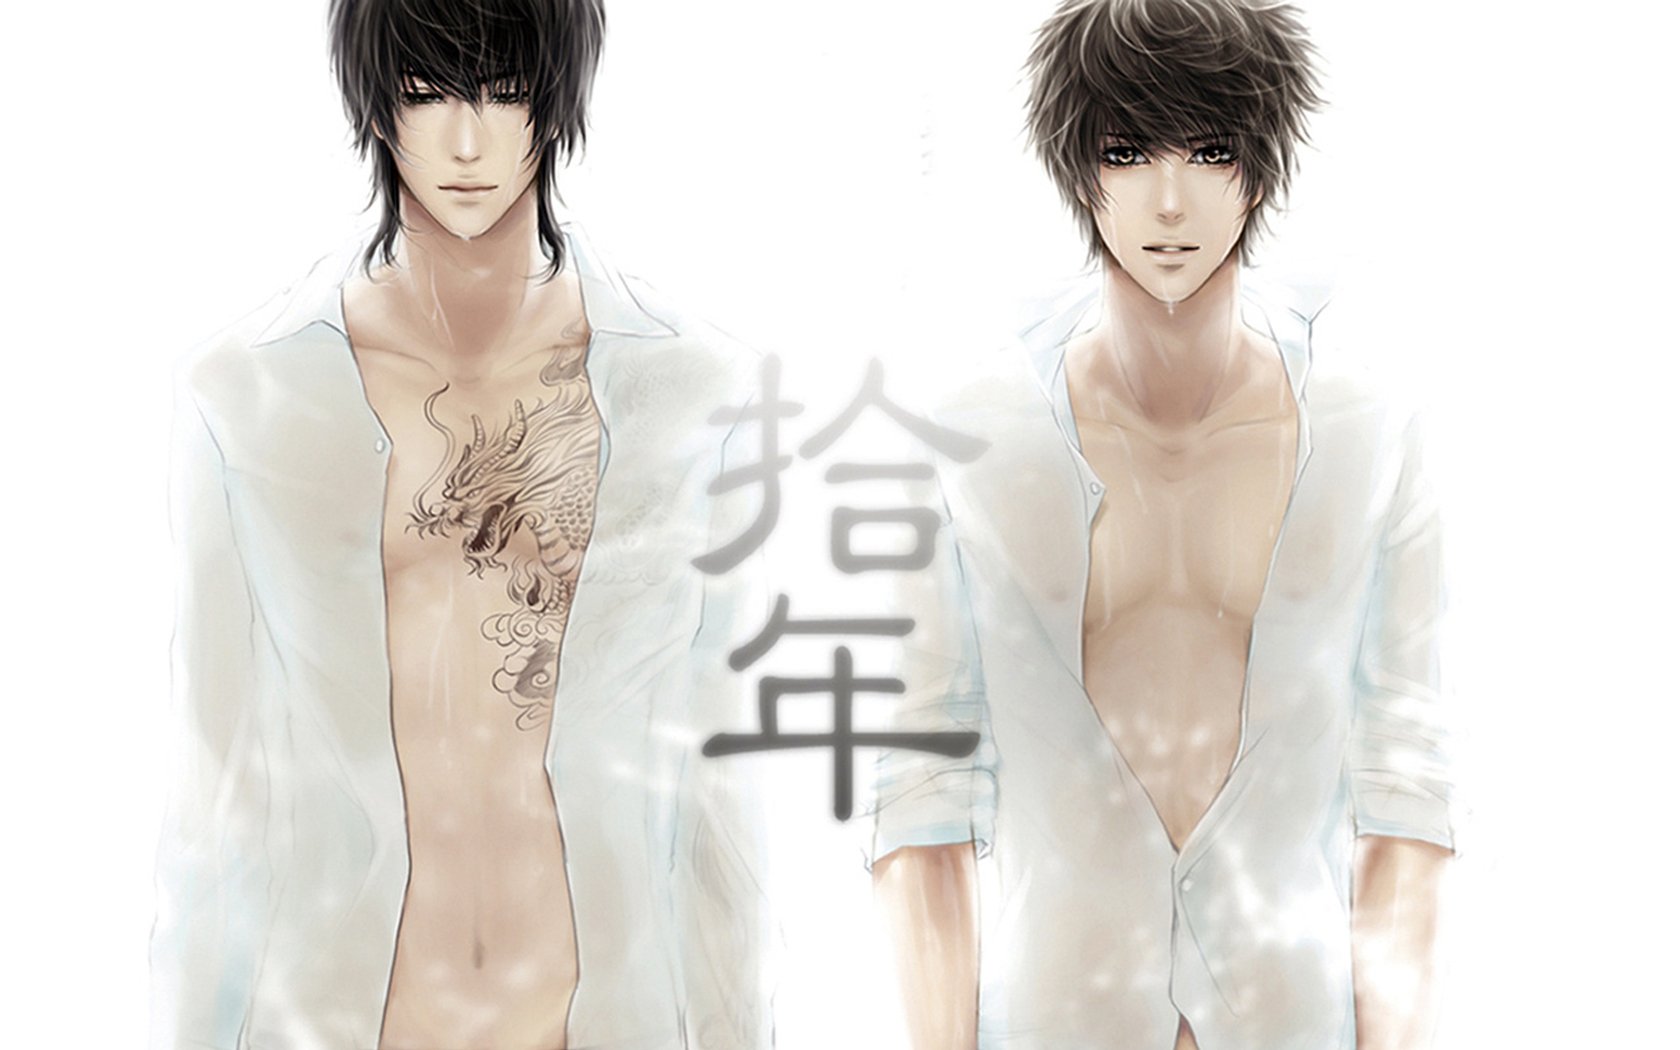 boys, Shirts, White, Characters, Text, Tattoo, Dragon, Water Wallpaper